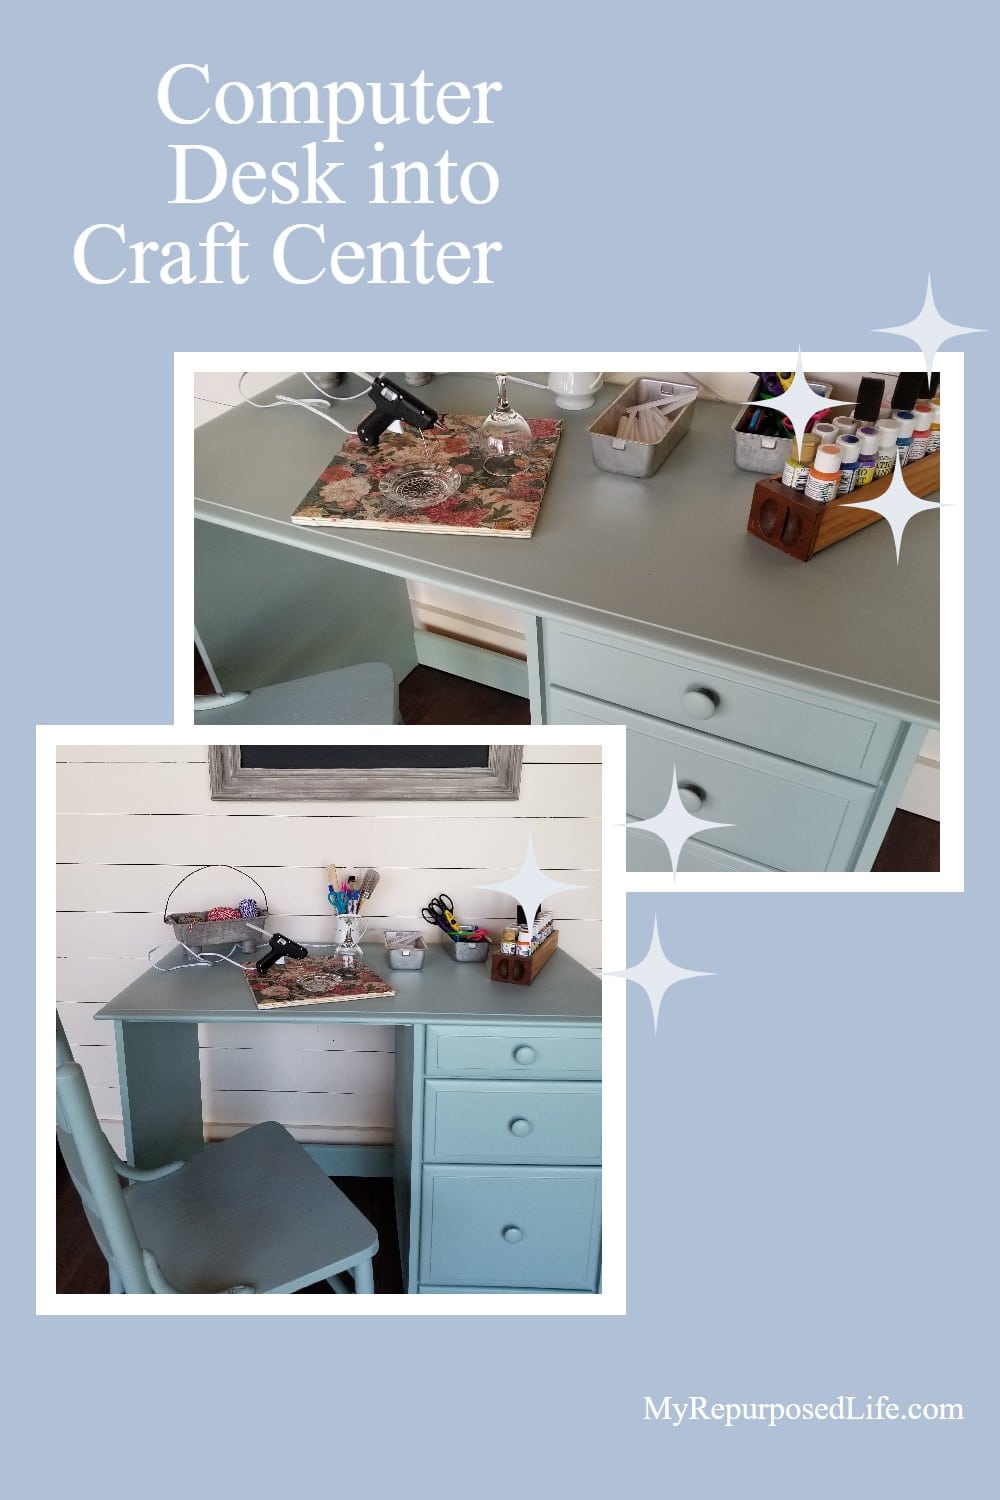 How to do a quick and easy makeover on an old keyboard computer desk turning it into a new and useful craft desk! #MyRepurposedLife via @repurposedlife